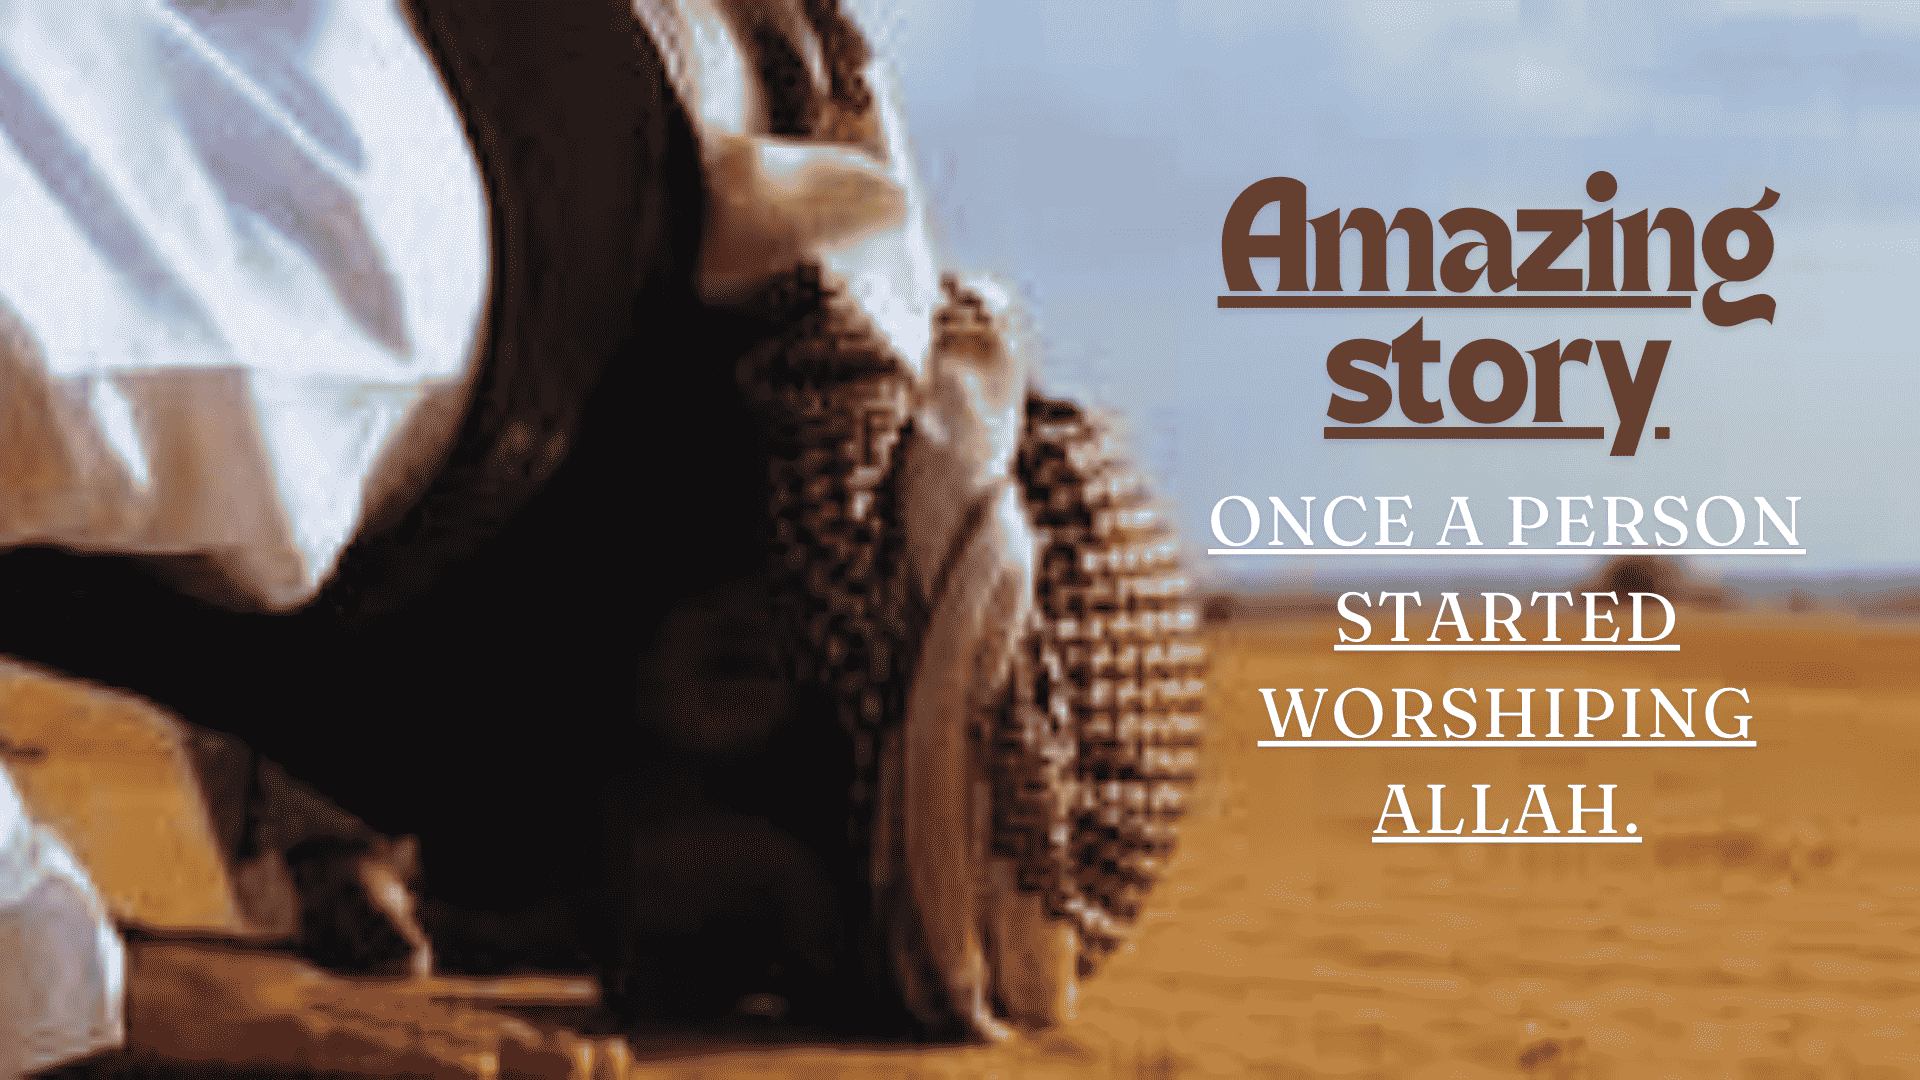 Once a person started worshiping Allah. Amazing story